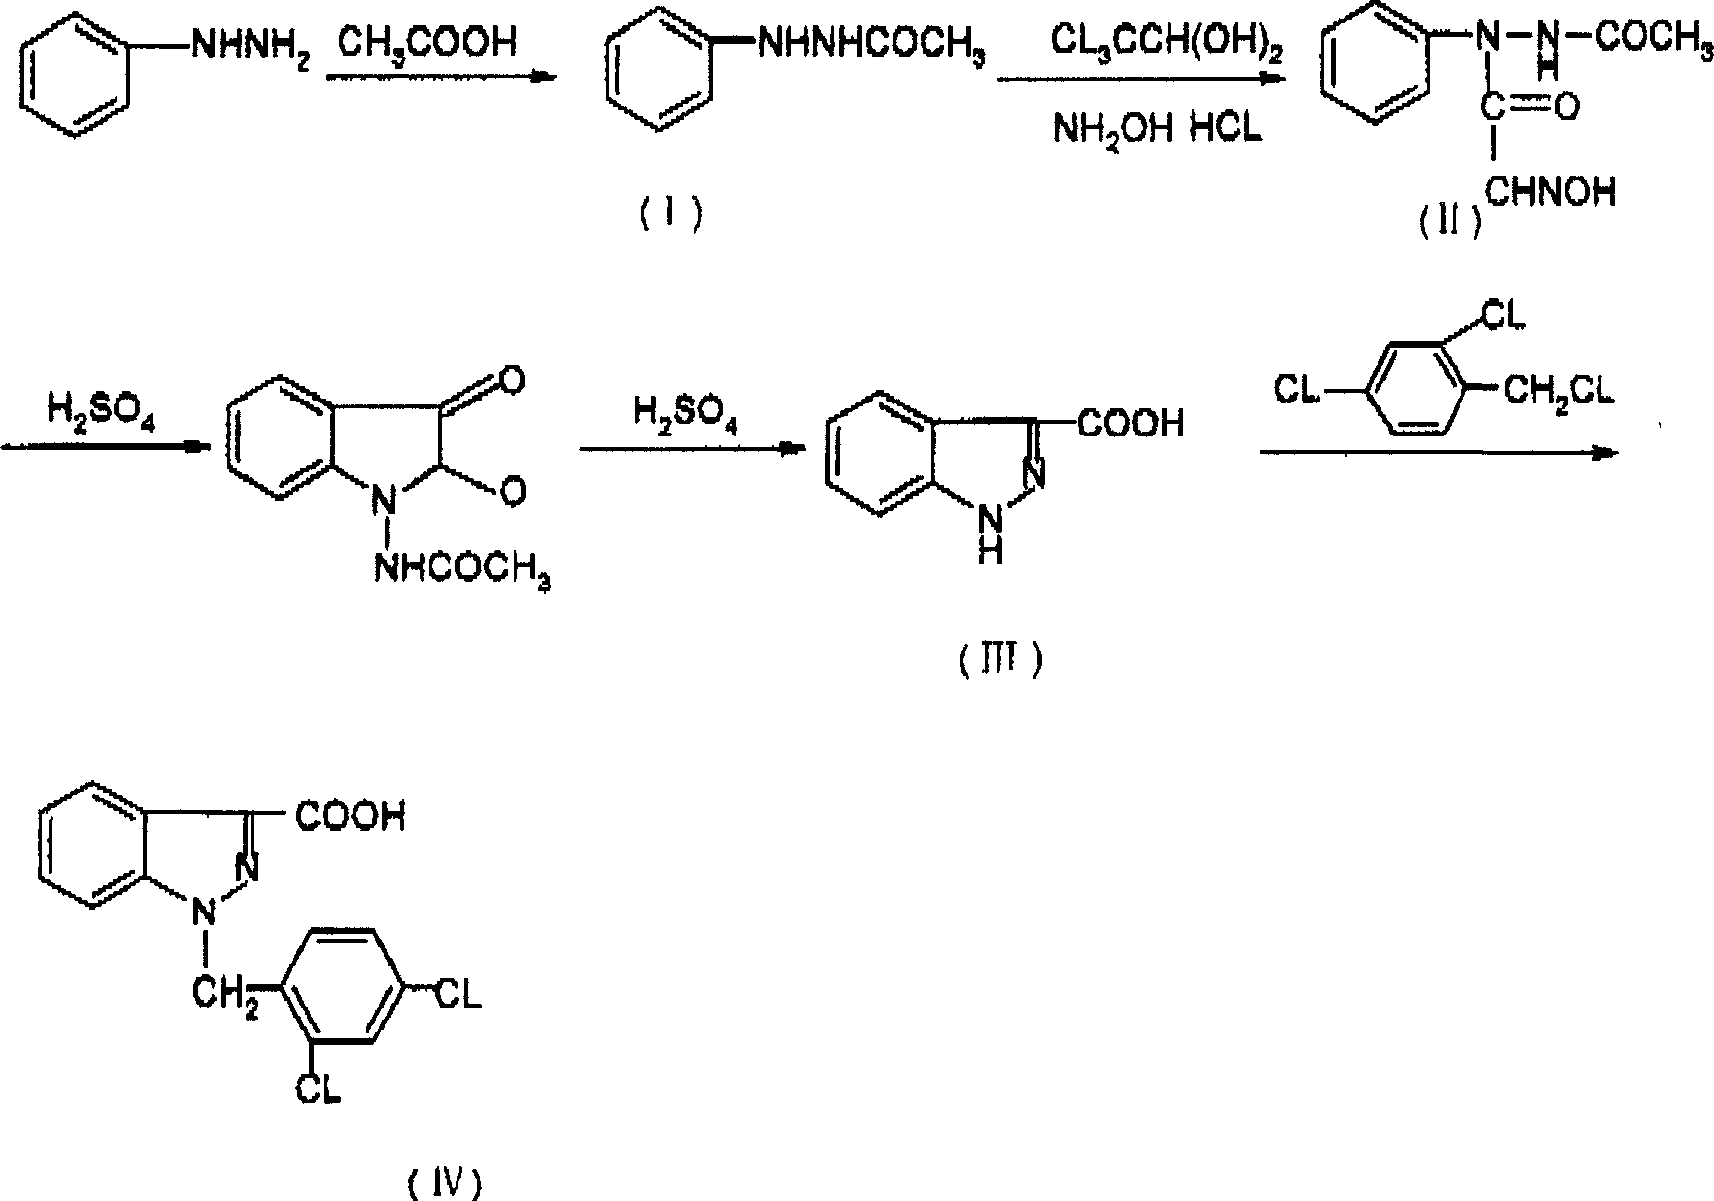 Process for synthesis of lonidamine